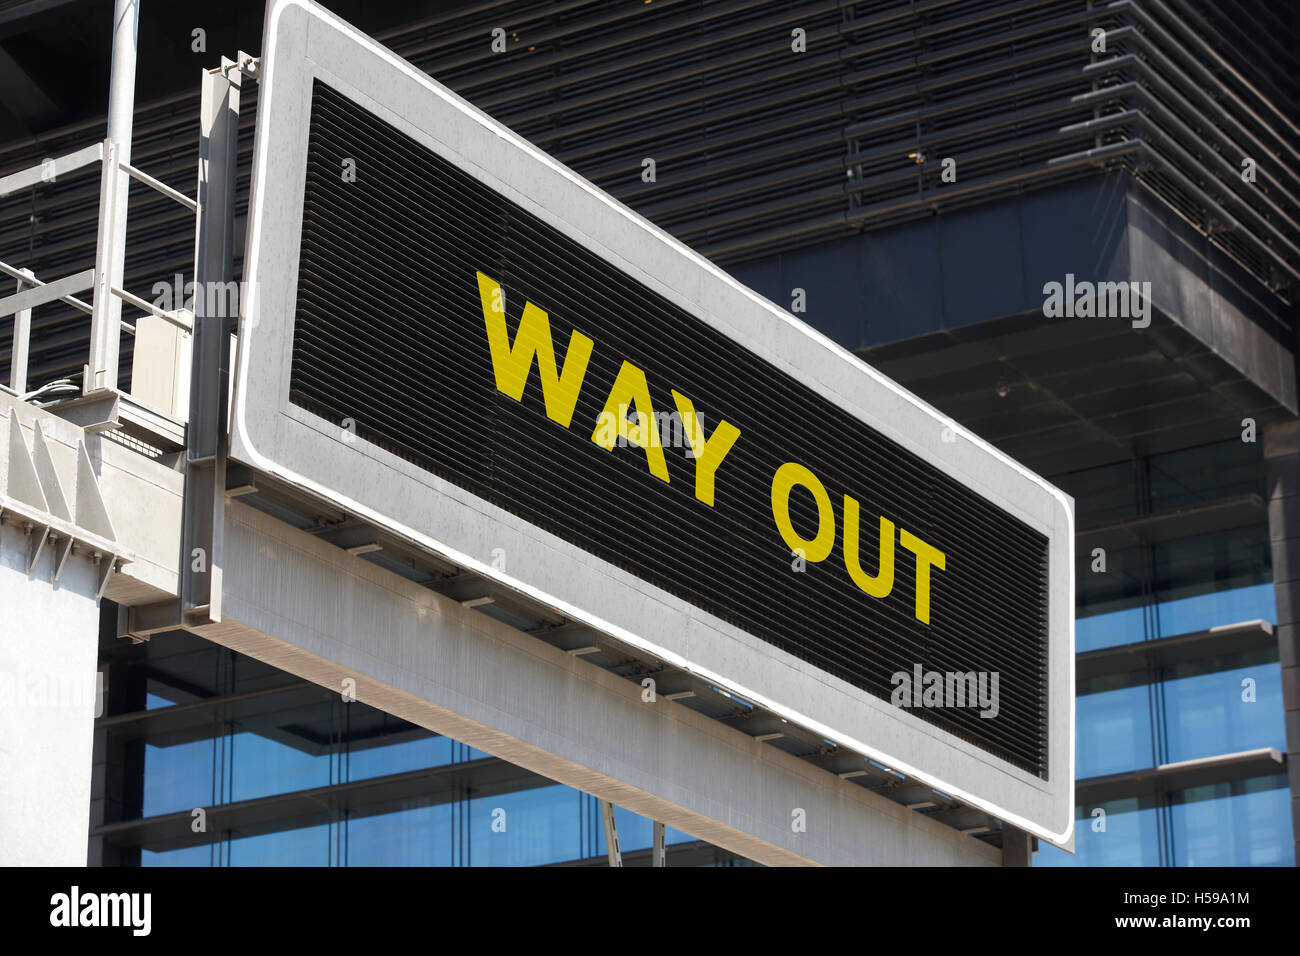 Way out signpost in the city with building facade background. Horizontal Stock Photo